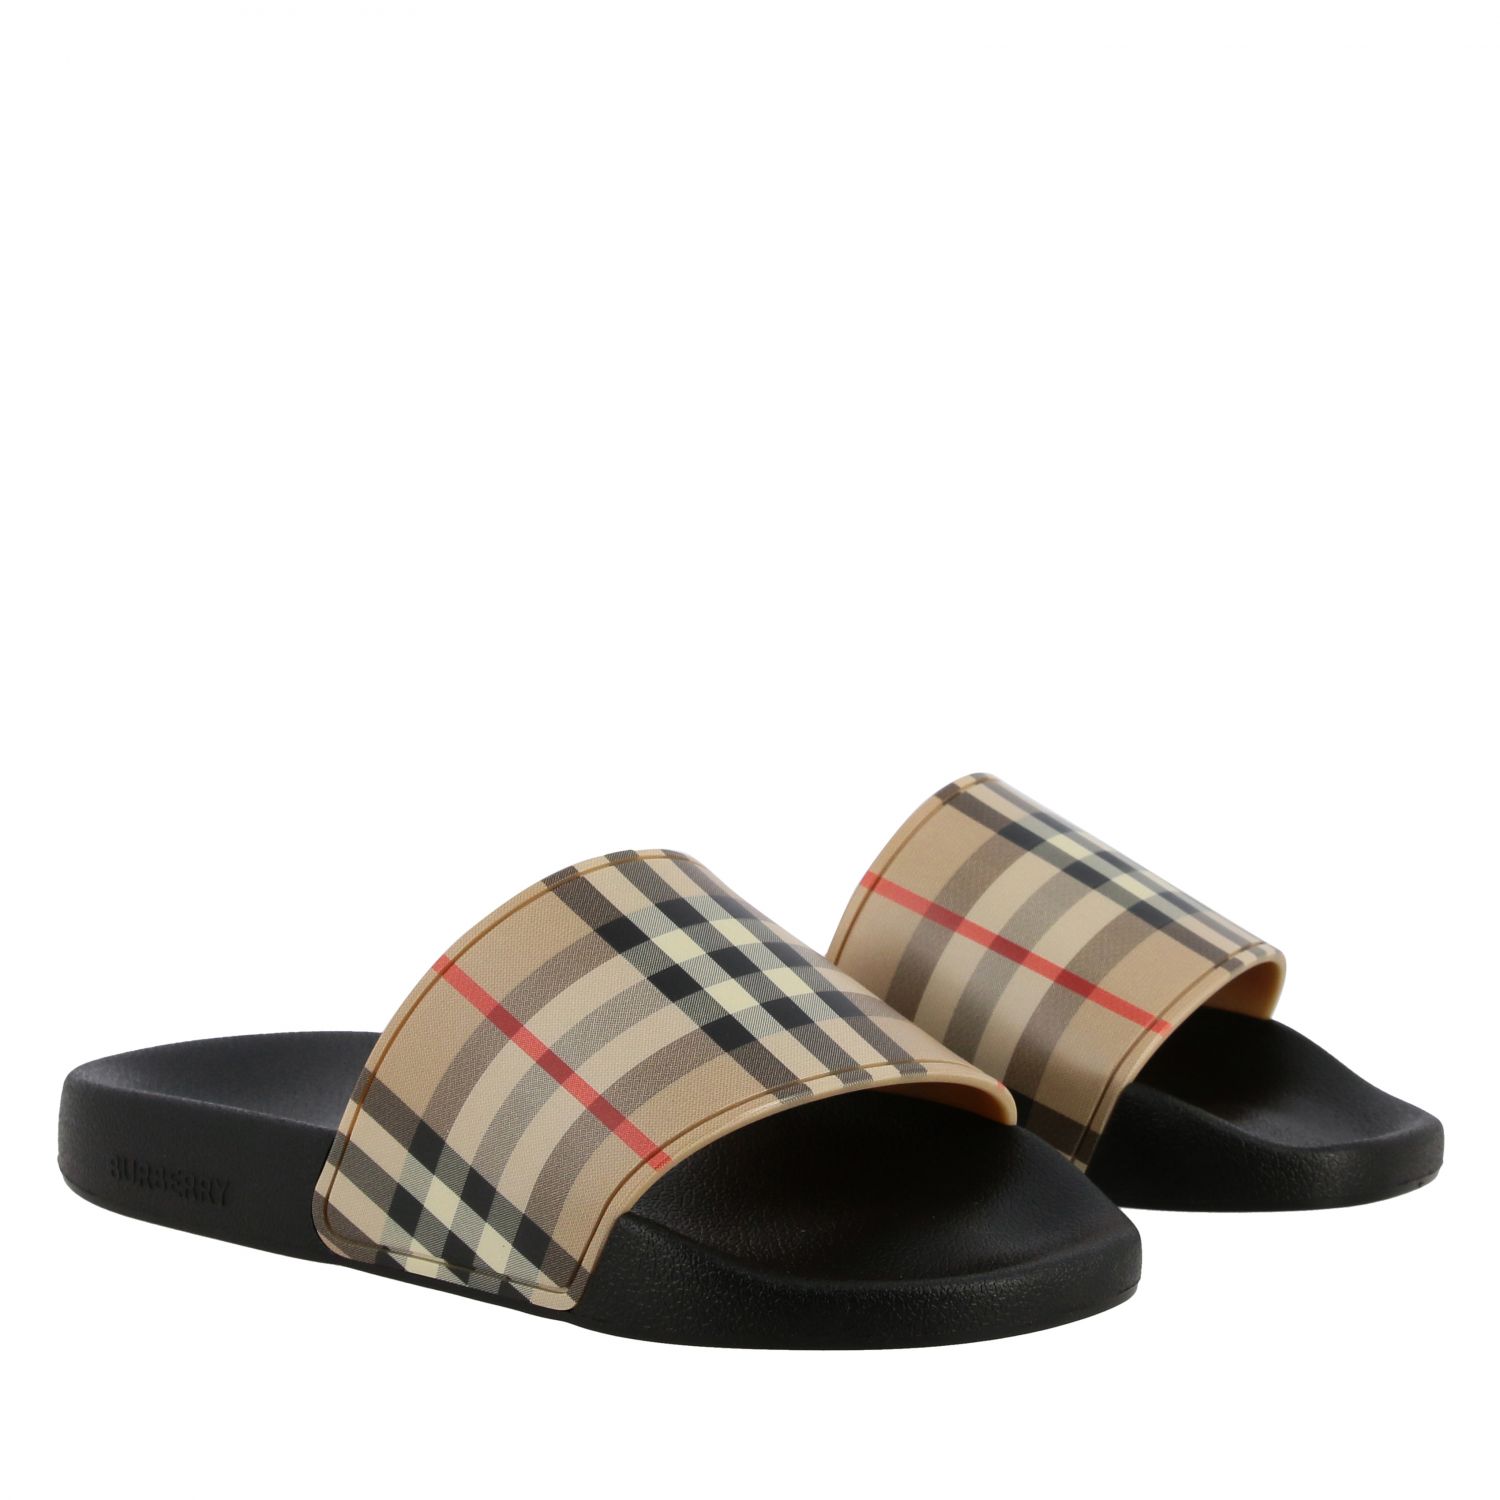 Burberry sandal with check pattern | Sandals Burberry Men Beige ...